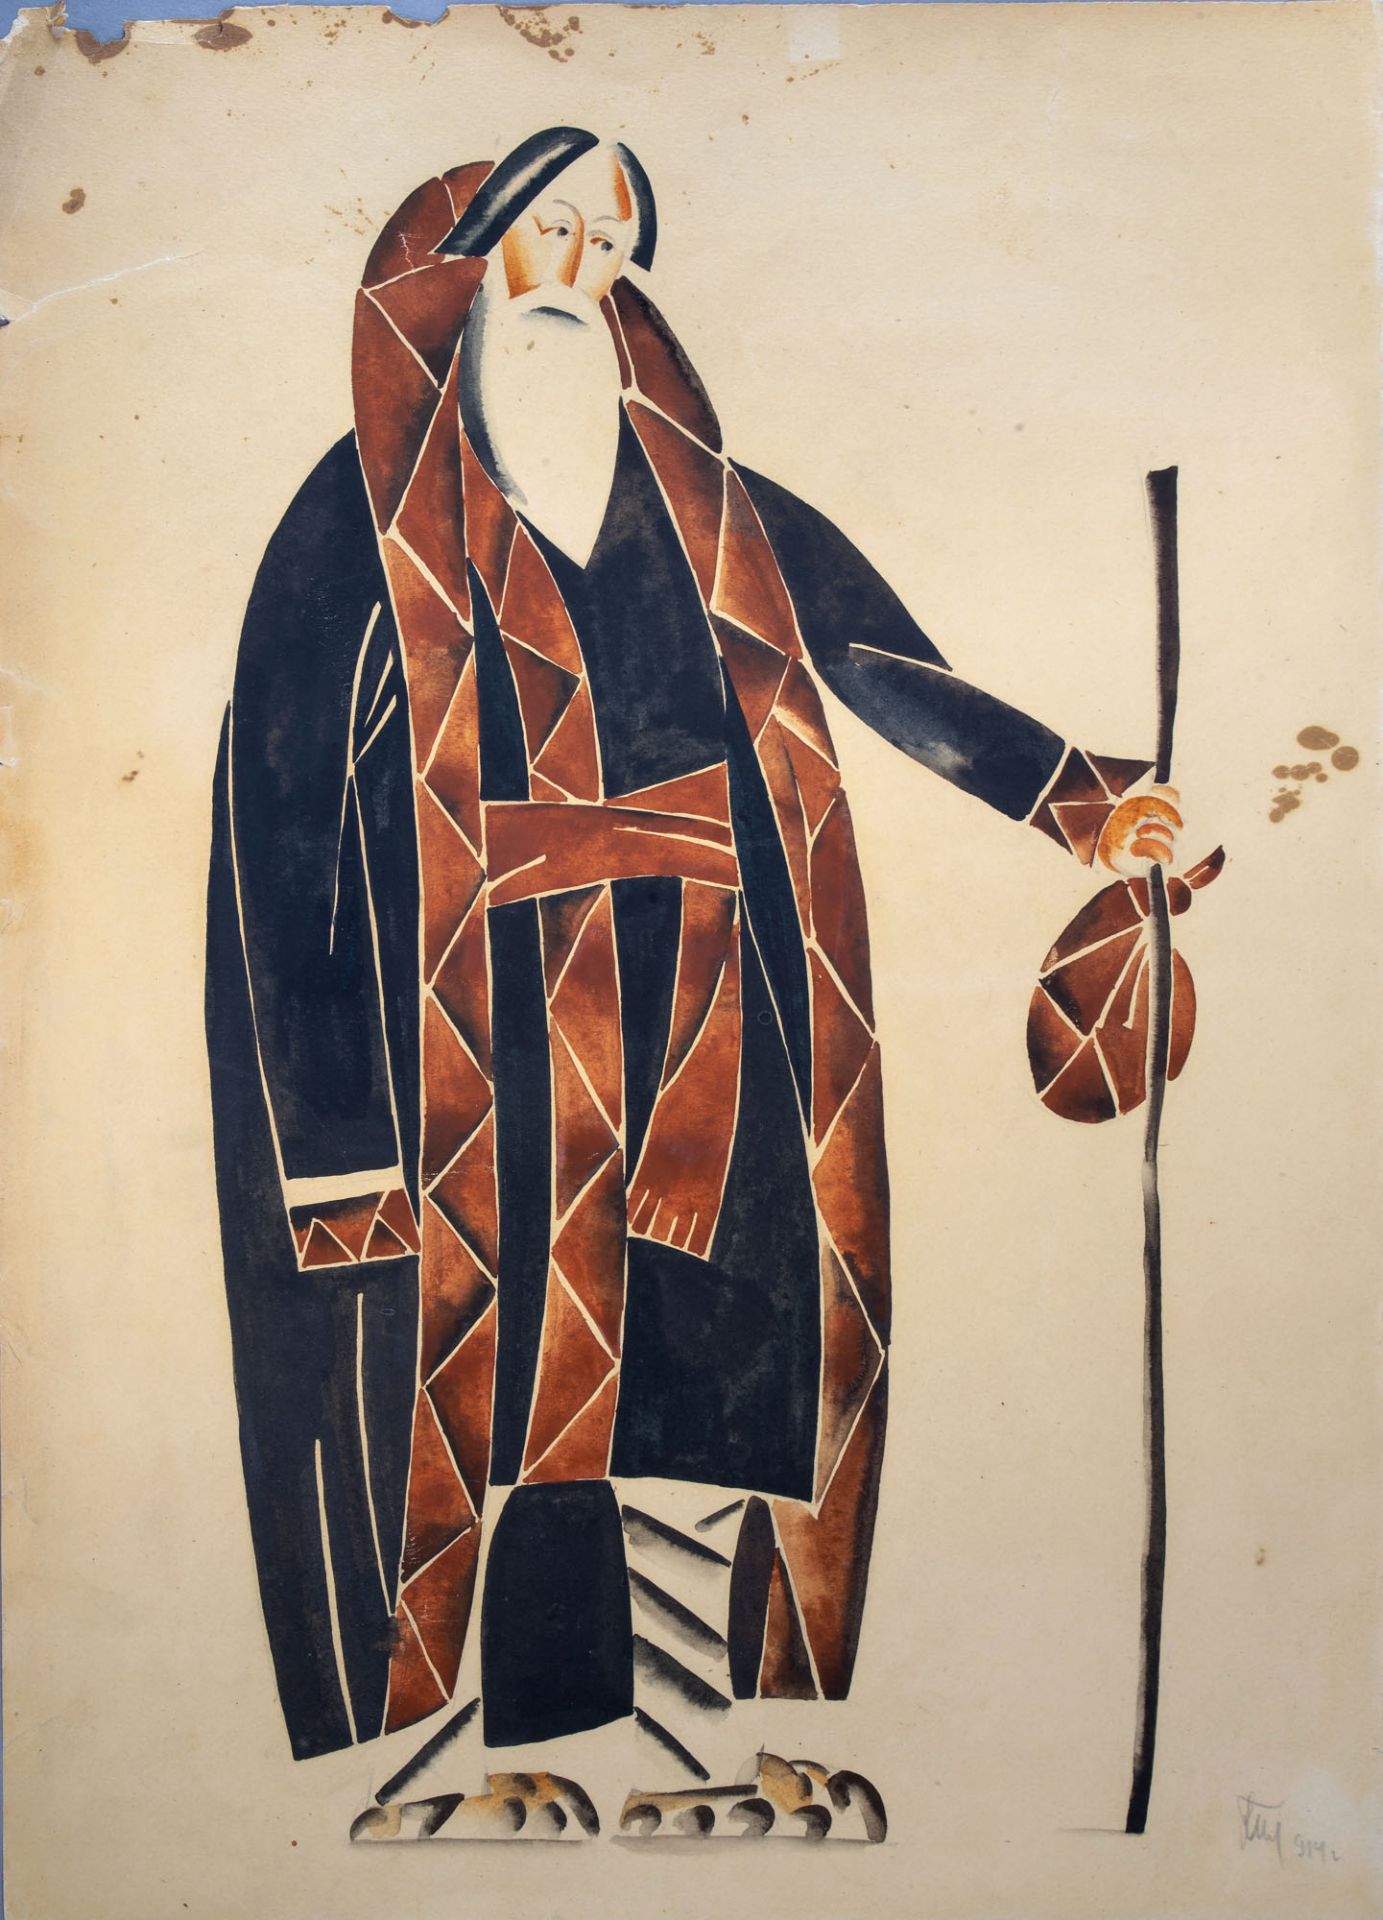 Vladimir Tatlin (1885-1953), Costume Design for the Unrealized Production of "The Life of the Tsar" 